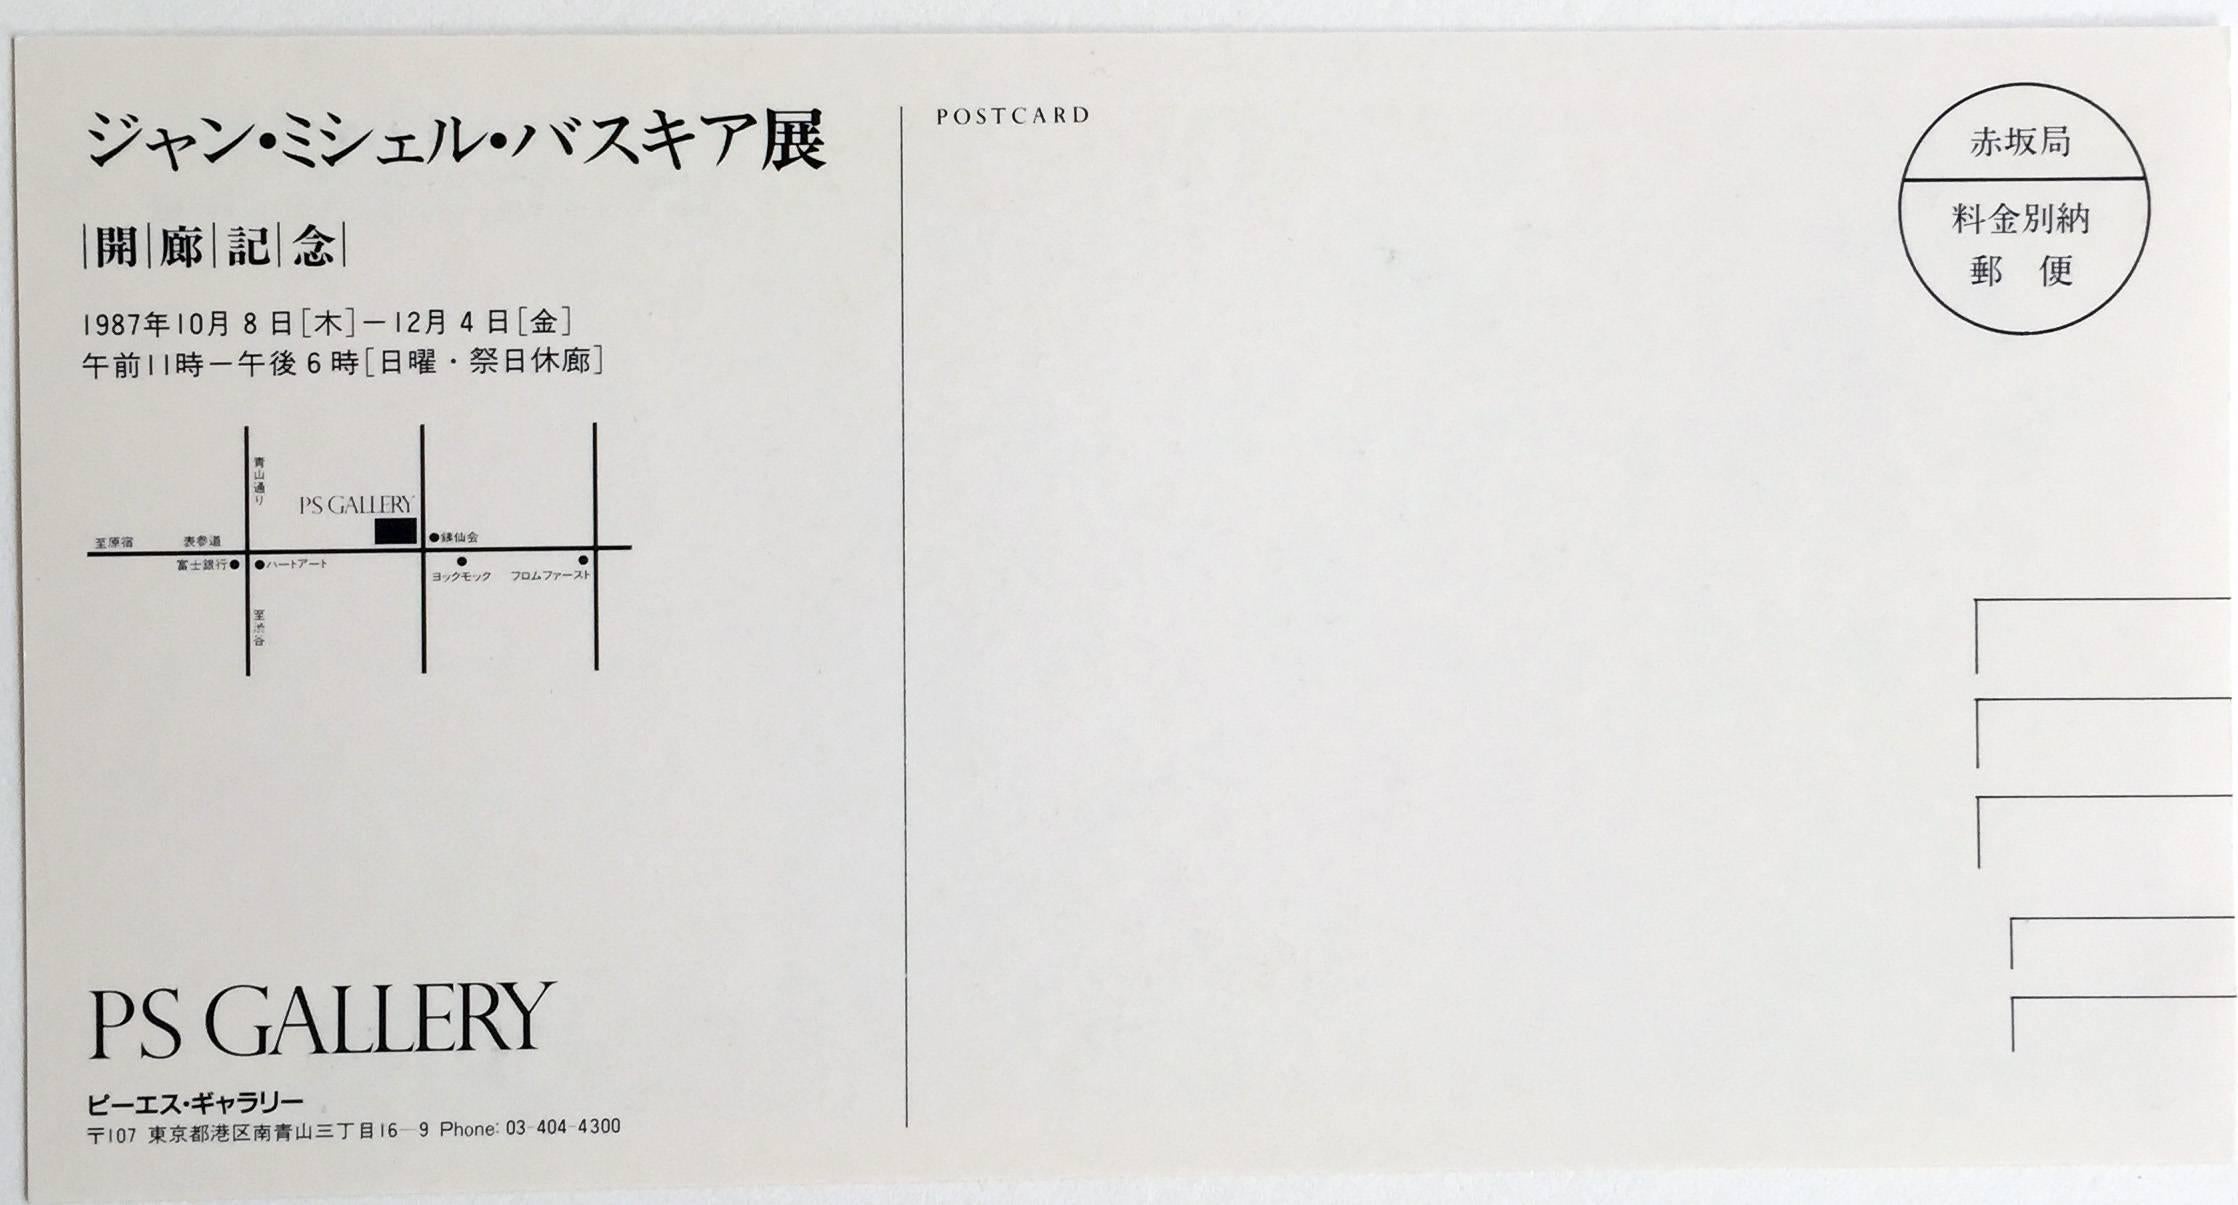 Basquiat Tokyo, 1987
Vintage original announcement card to: Jean-Michel Basquiat, Tokyo, PS Gallery, October - December 1987.
An exceptionally rare Basquiat collectible produced during the artist's lifetime, featuring a reproduction of Basquiat's